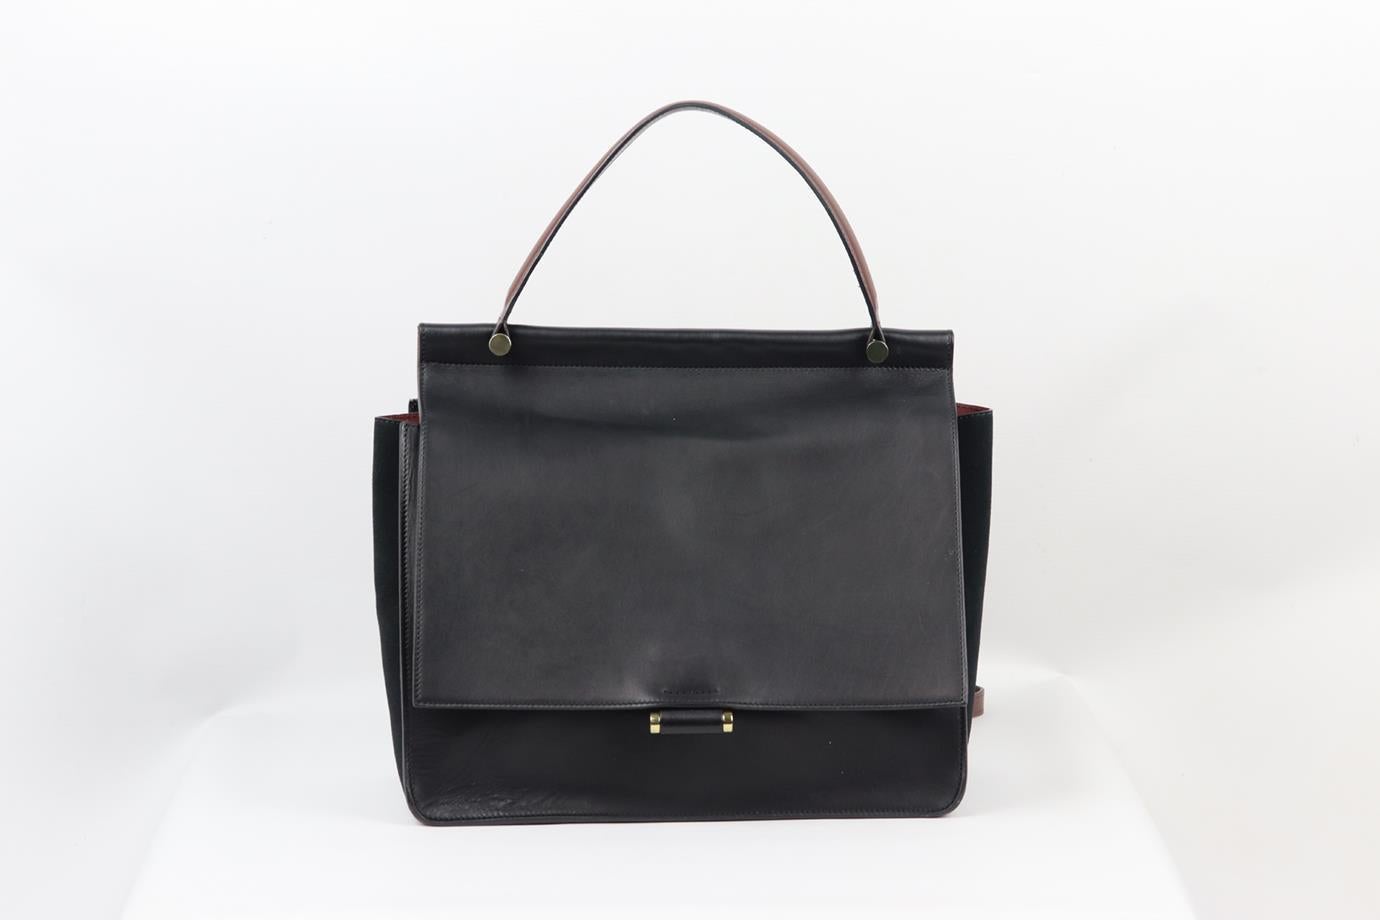 By Malene Birger suede andleather shoulder bag. Made from soft black leather and suede with burgundy shoulder strap and handle, it opens to a large internal compartment with additional pockets. Black, burgundy and gold. Magnetic snap fastening at